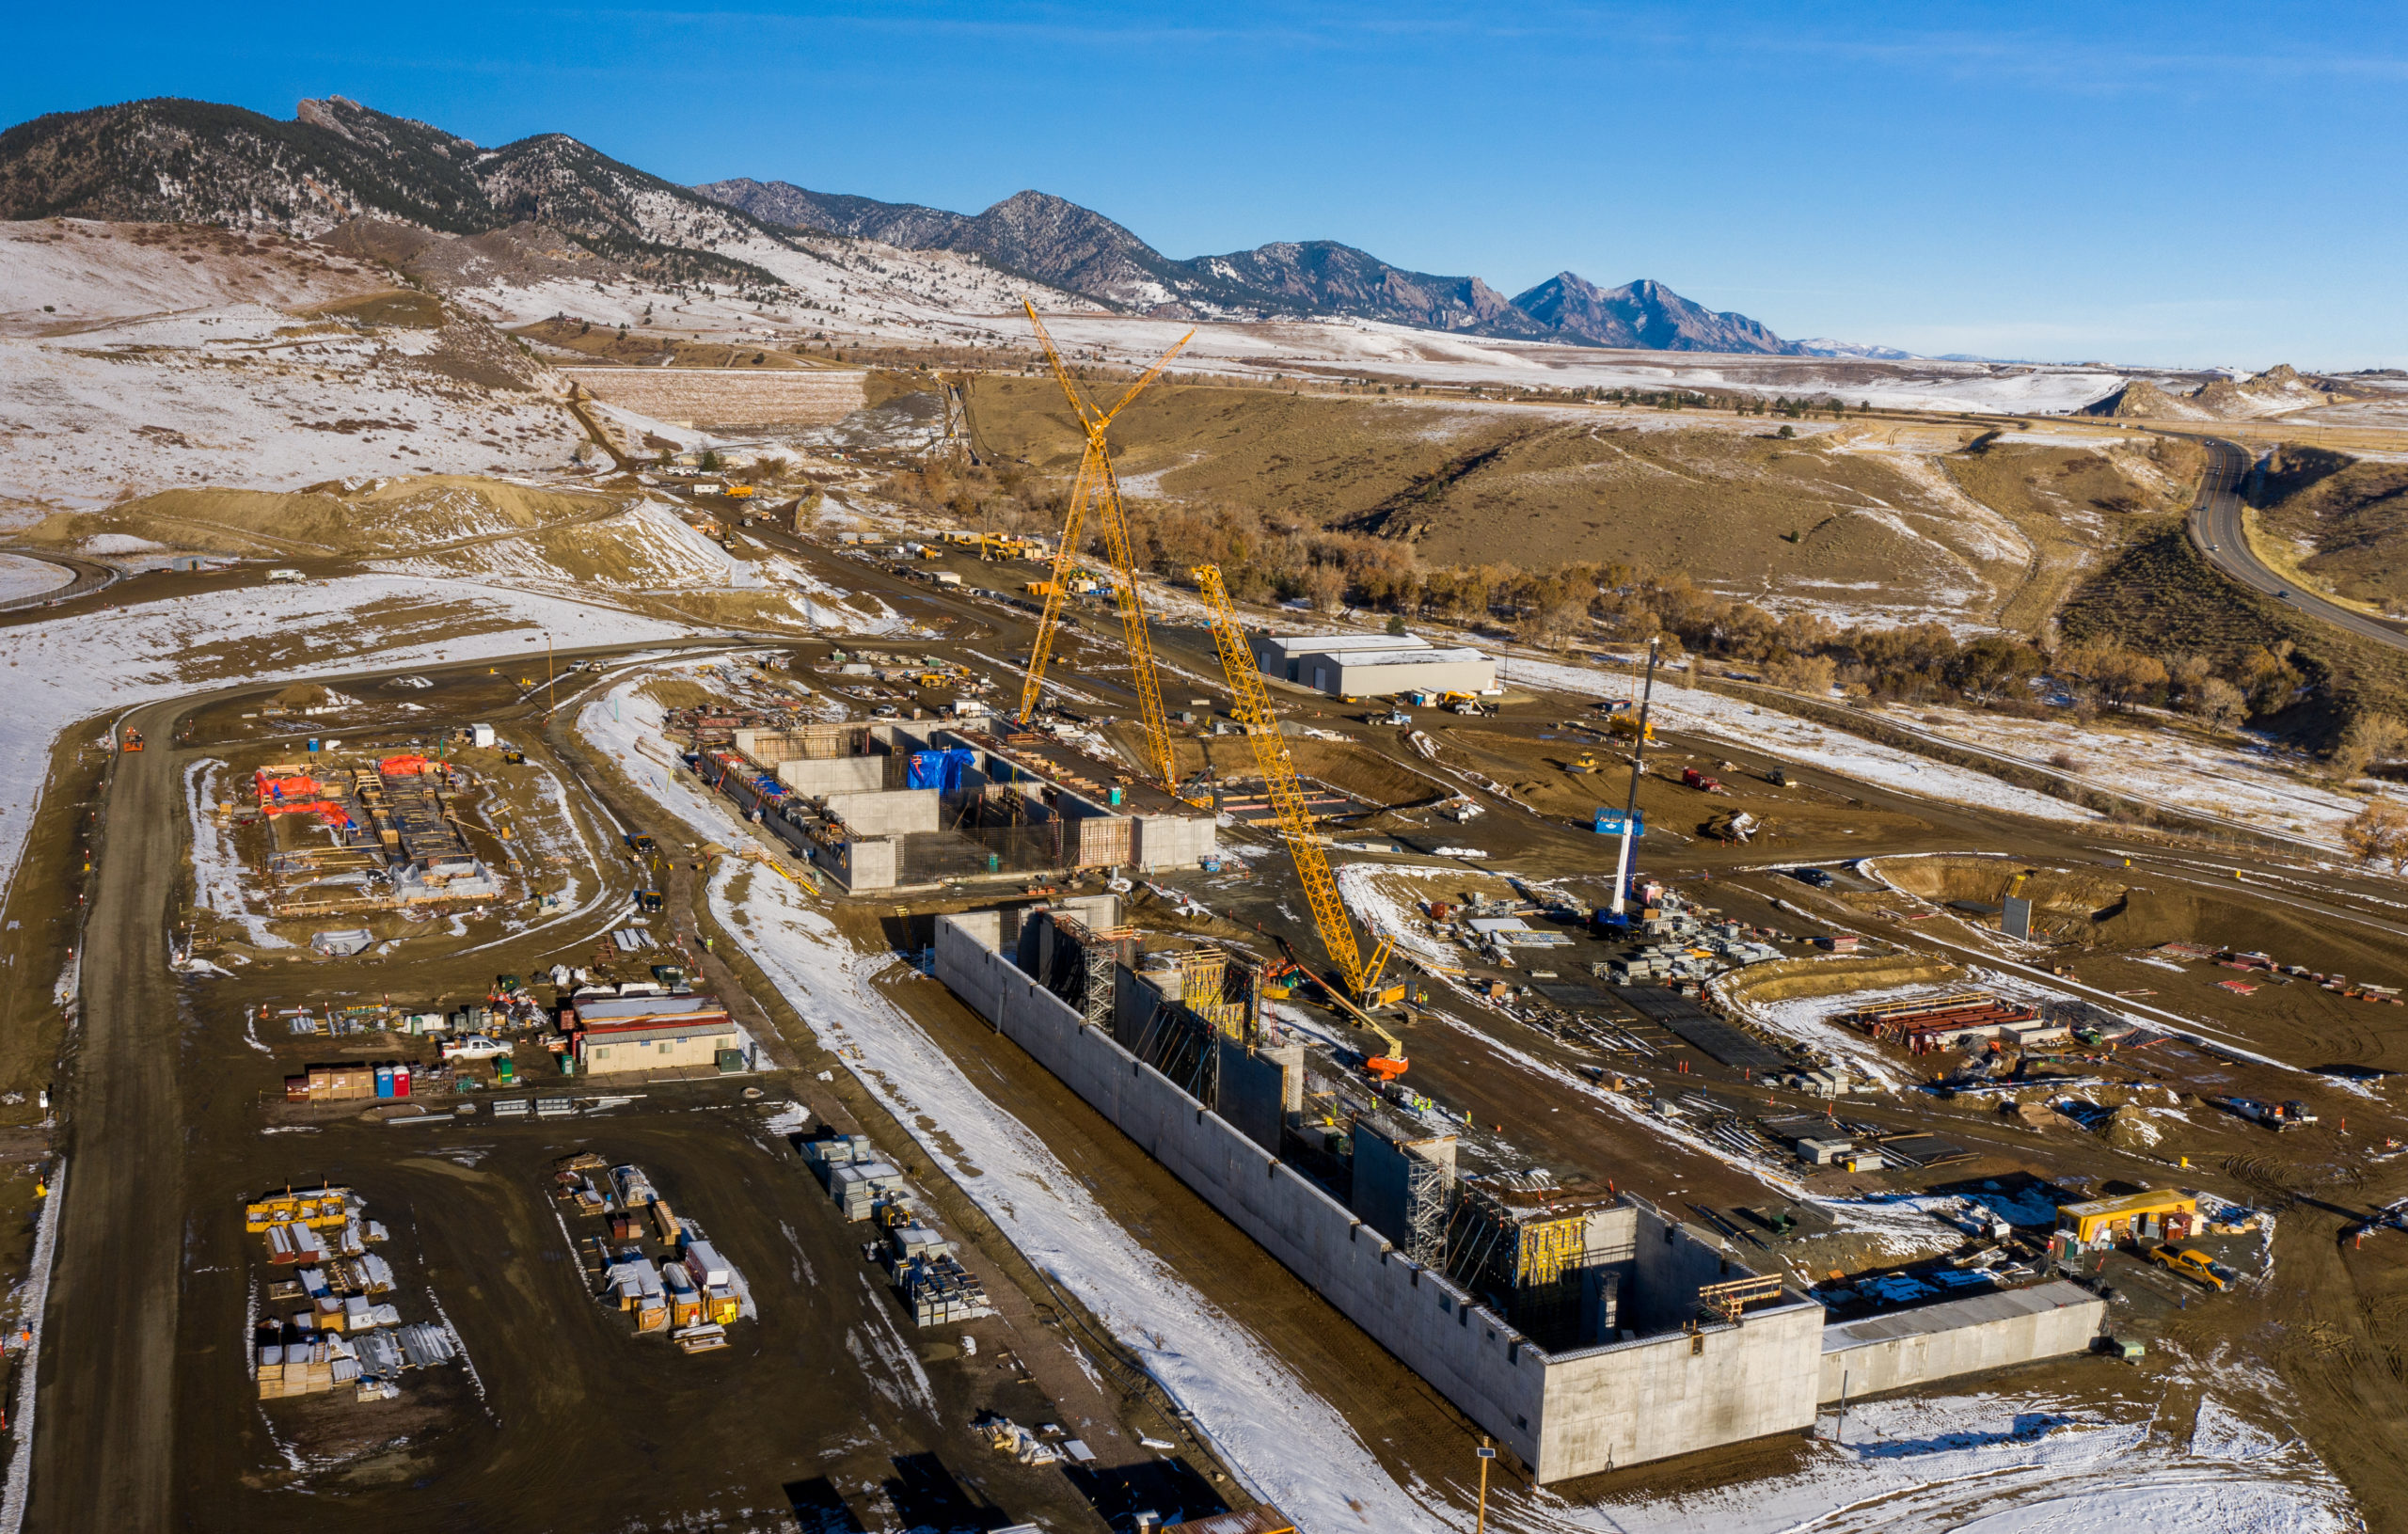 Denver Water's new Northwater Treatment Plant under construction north of Golden on Oct. 28, 2020. Photo credit: Denver Water.